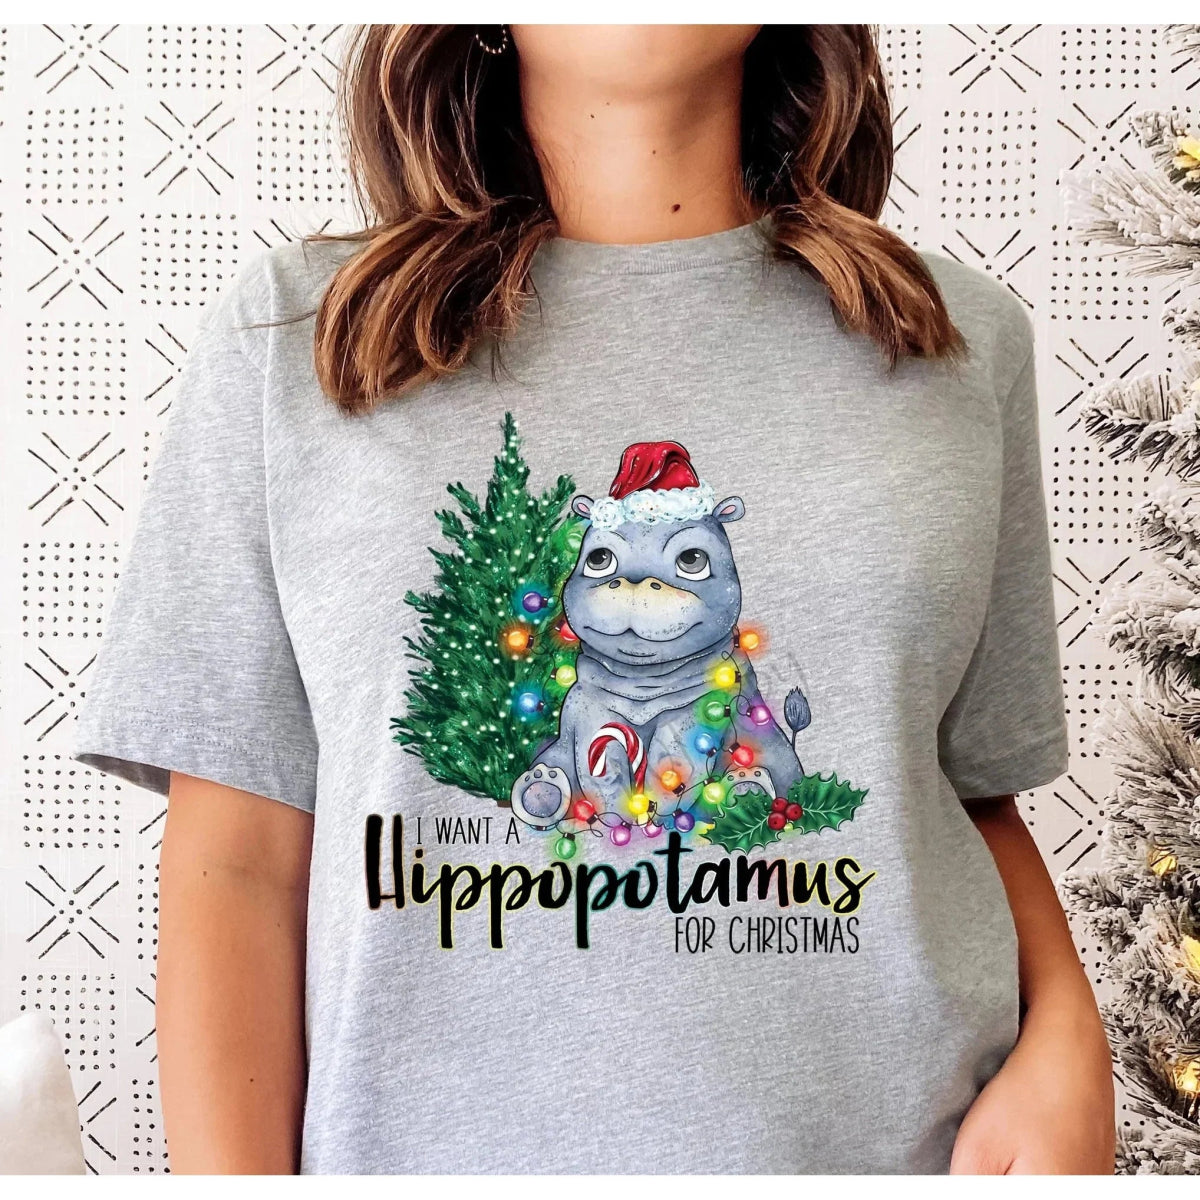 I Want a Hippopotamus for Christmas Graphic tee - worldclasscostumes